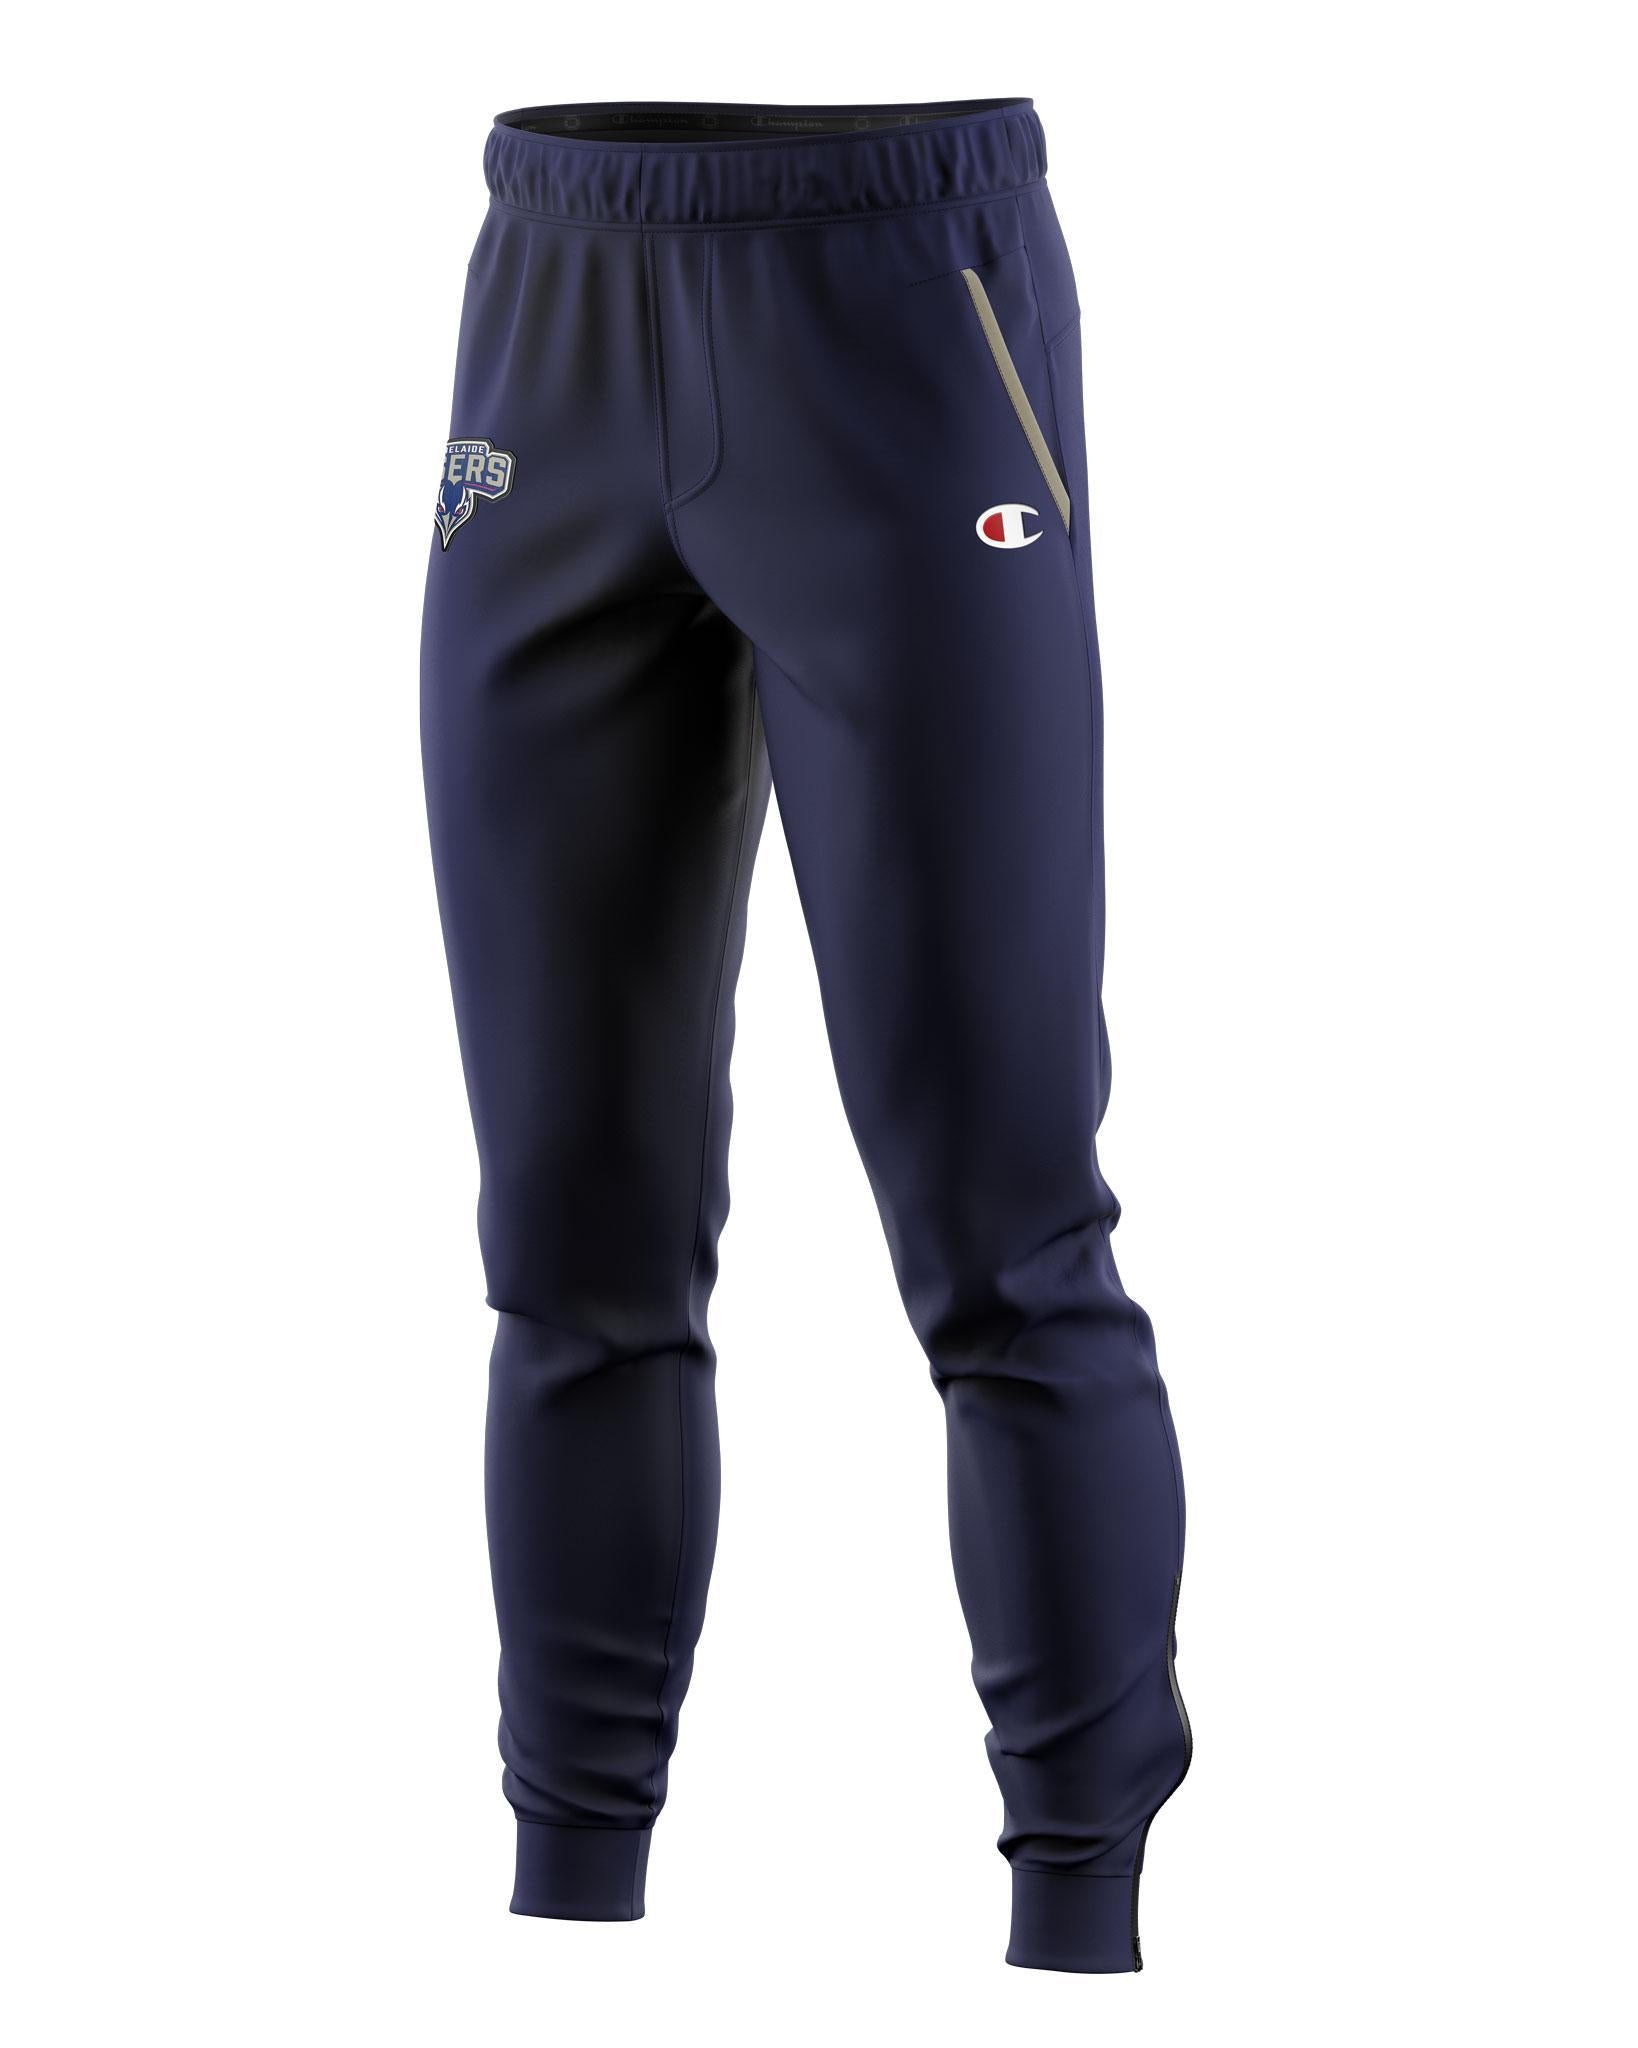 Adelaide 36ers 2021 Performance Trackpants - Adelaide 36ers